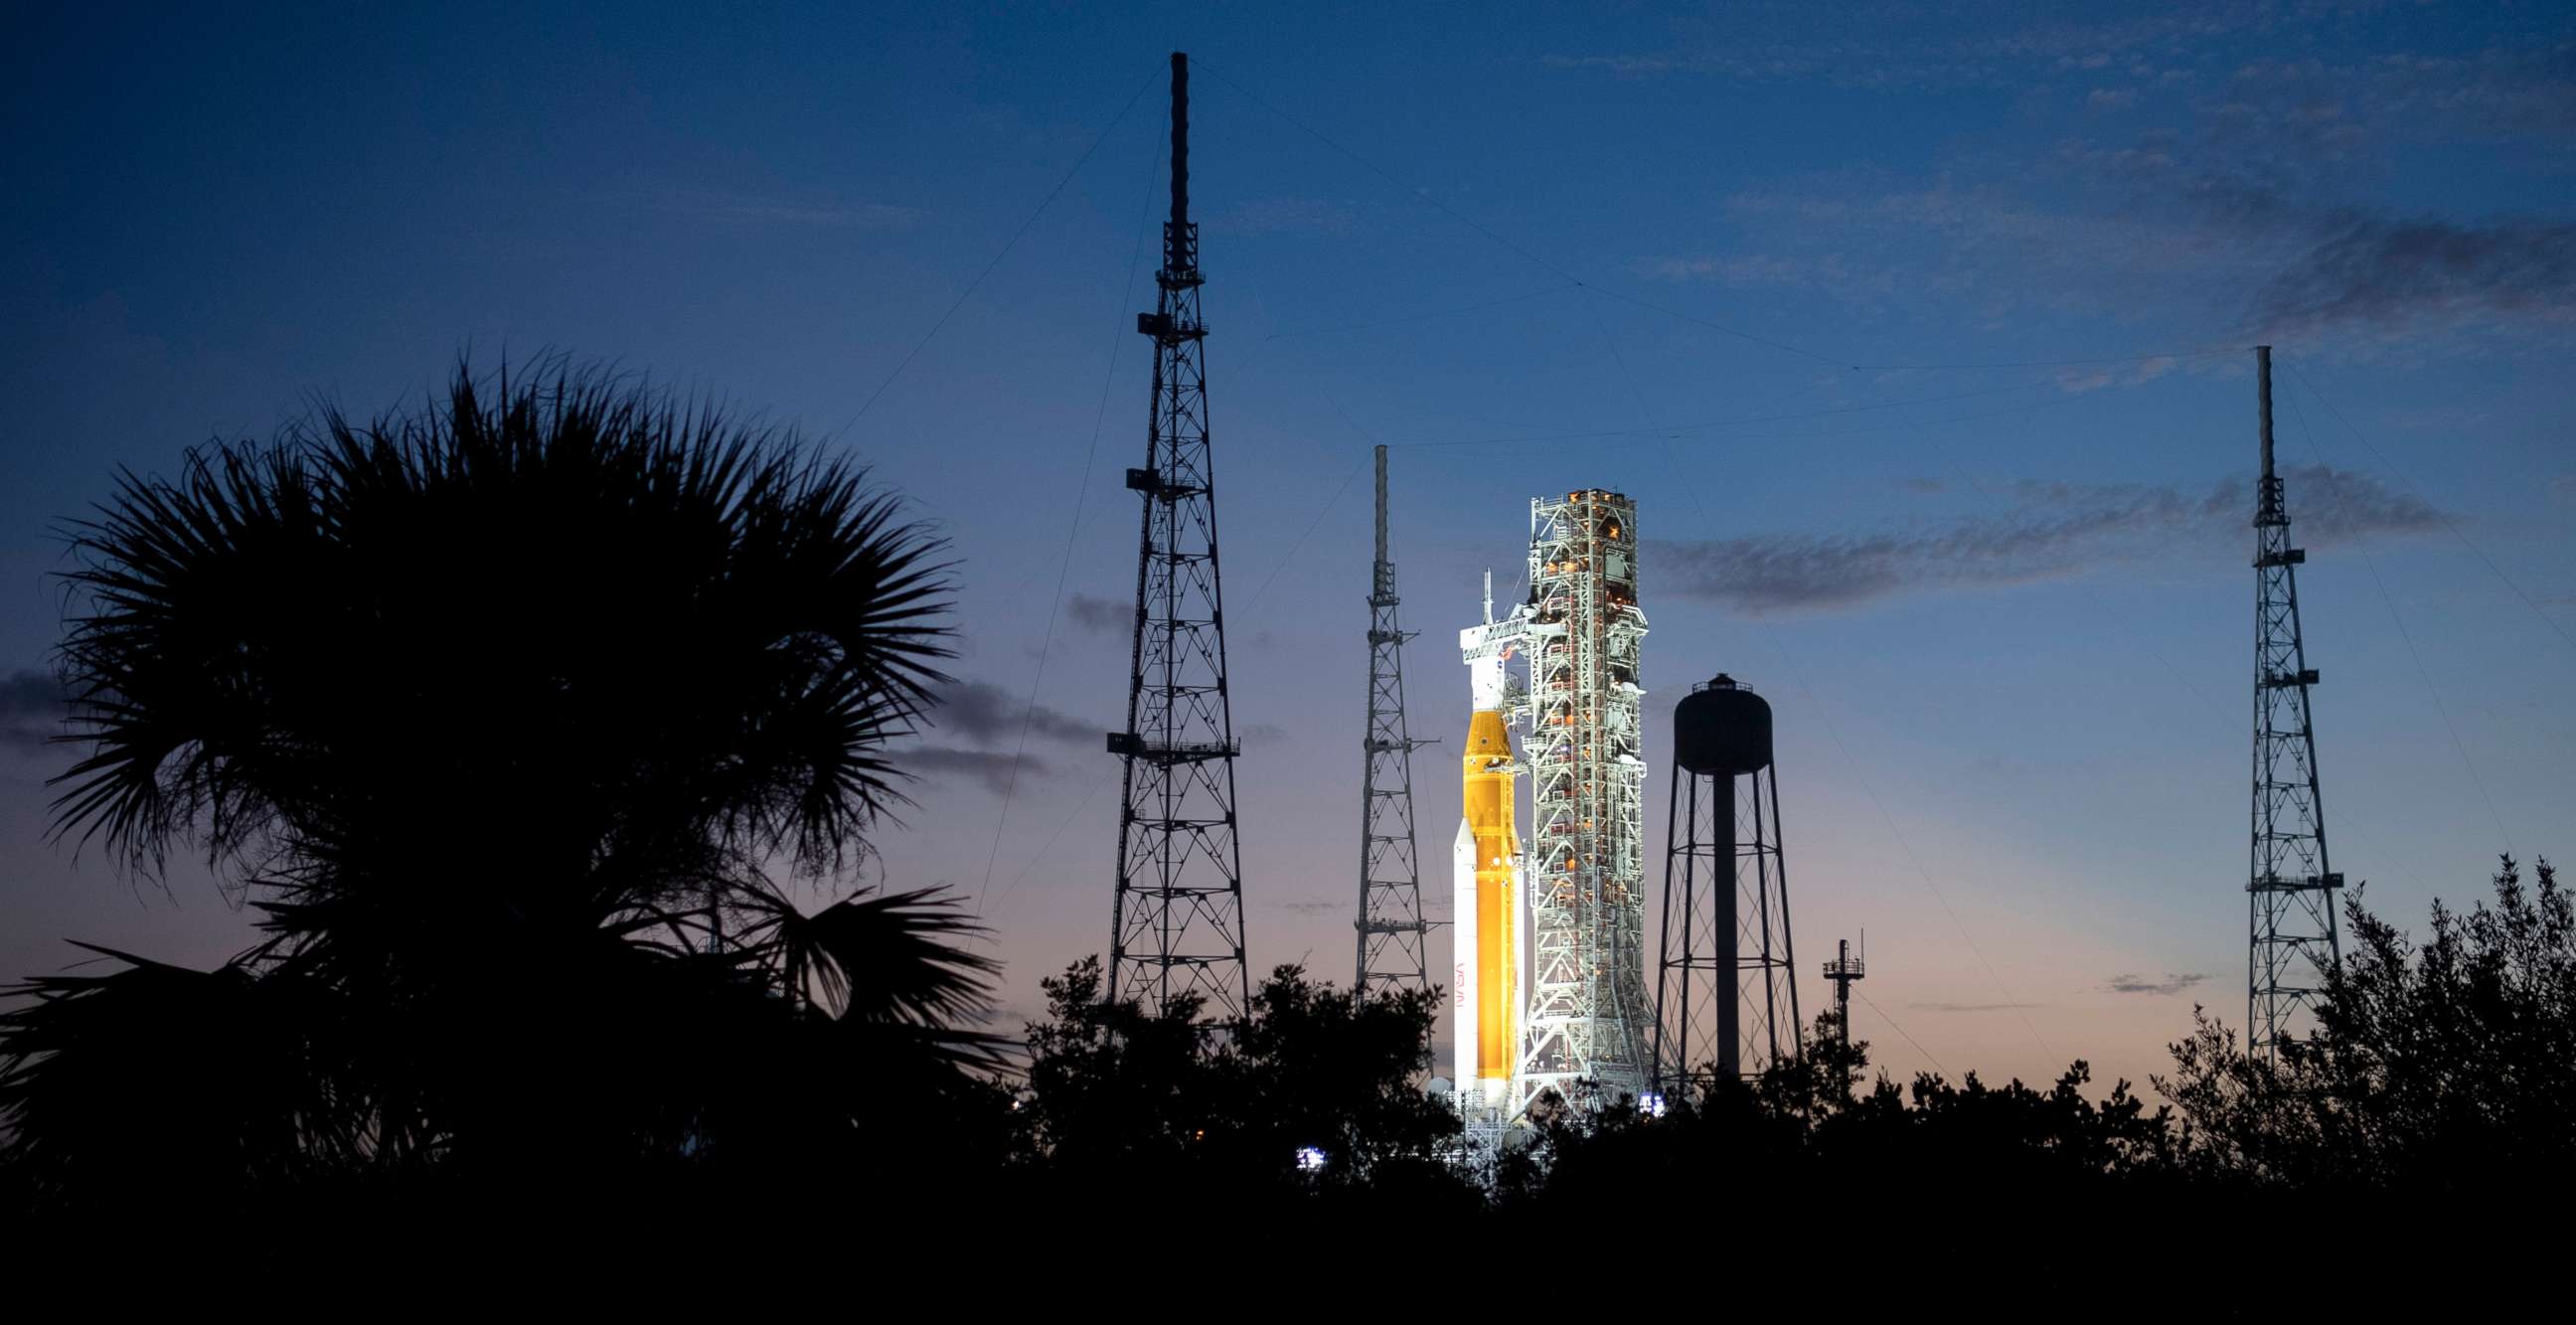 PHOTO: NASA's Space Launch System (SLS) rocket with the Orion spacecraft aboard is illuminated by spotlights after sunset atop the mobile launcher at Launch Pad 39B as preparations for launch continue, Nov. 6, 2022.